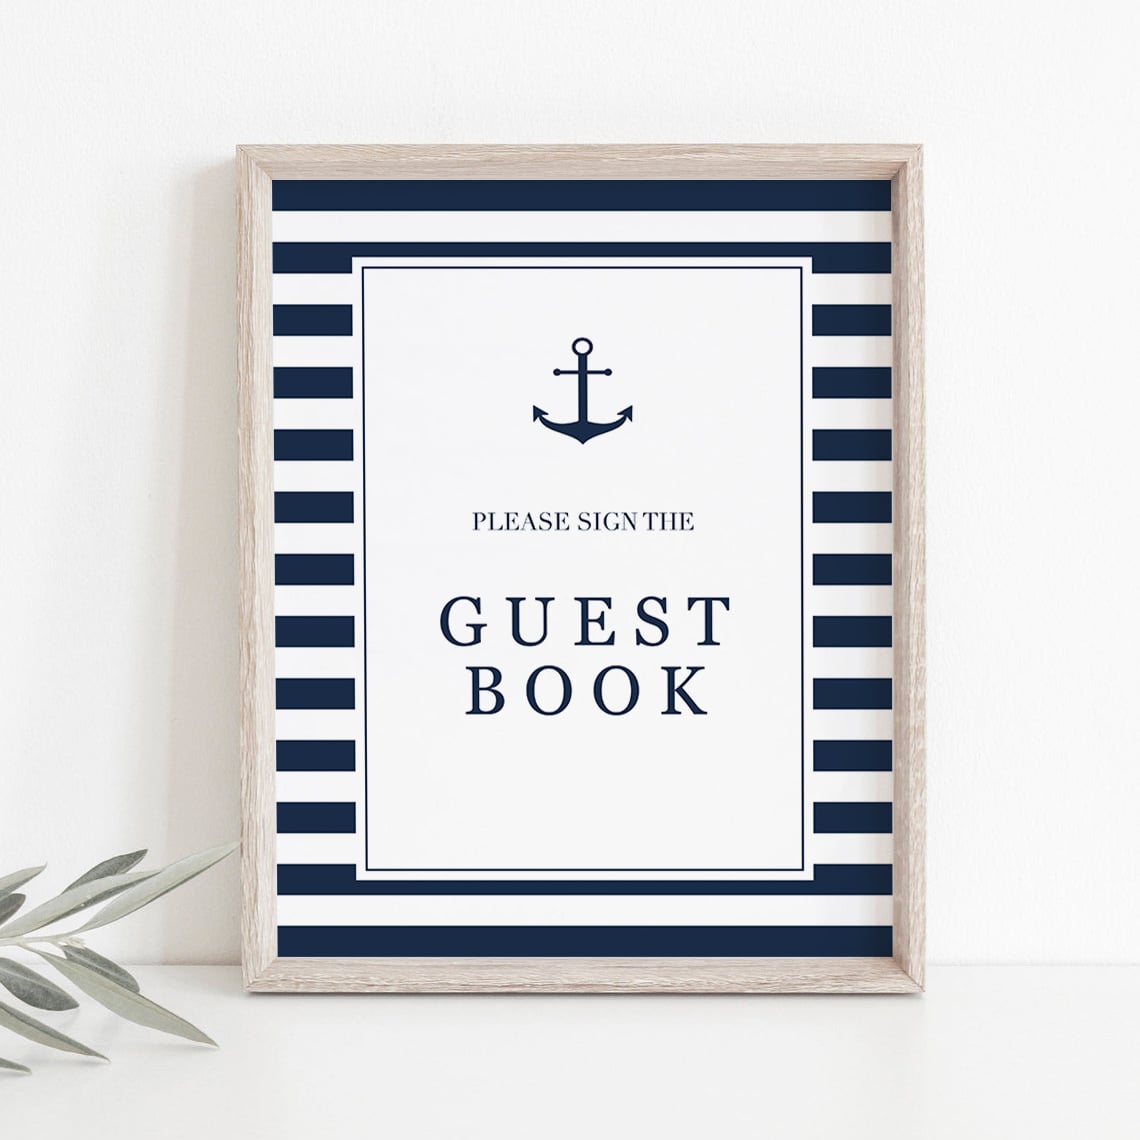 Anchor baby shower guest book sign table decorations by LittleSizzle